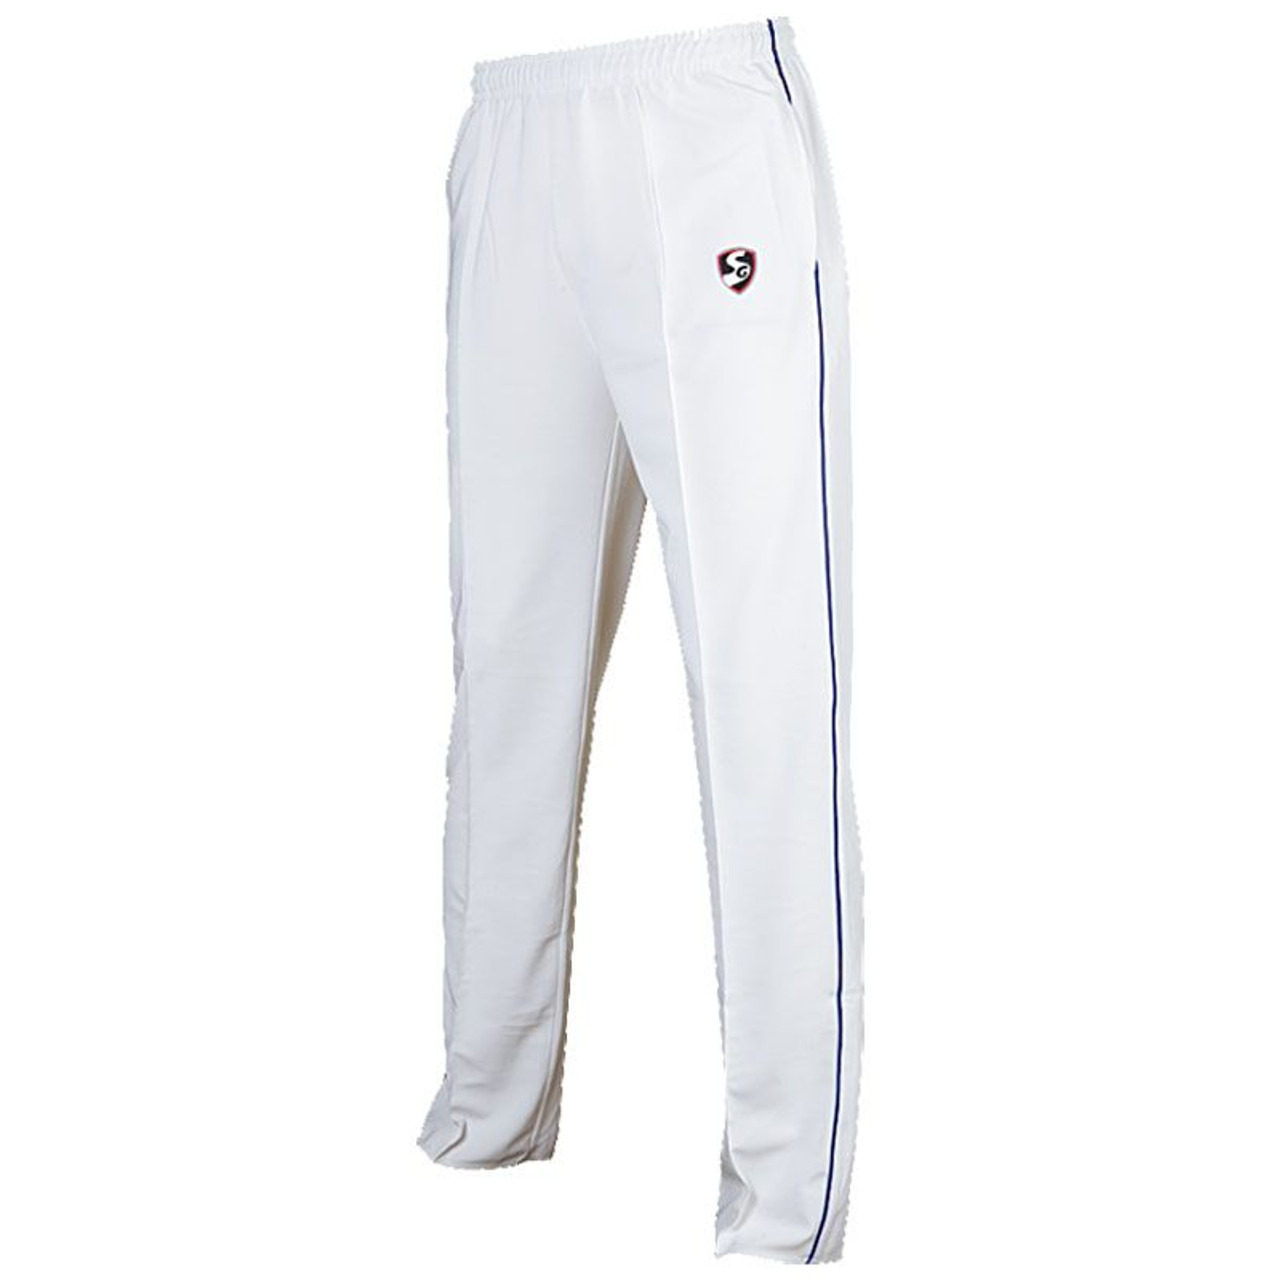 Cricket Pants  White  Printed Color  Custom Cricket Trouser